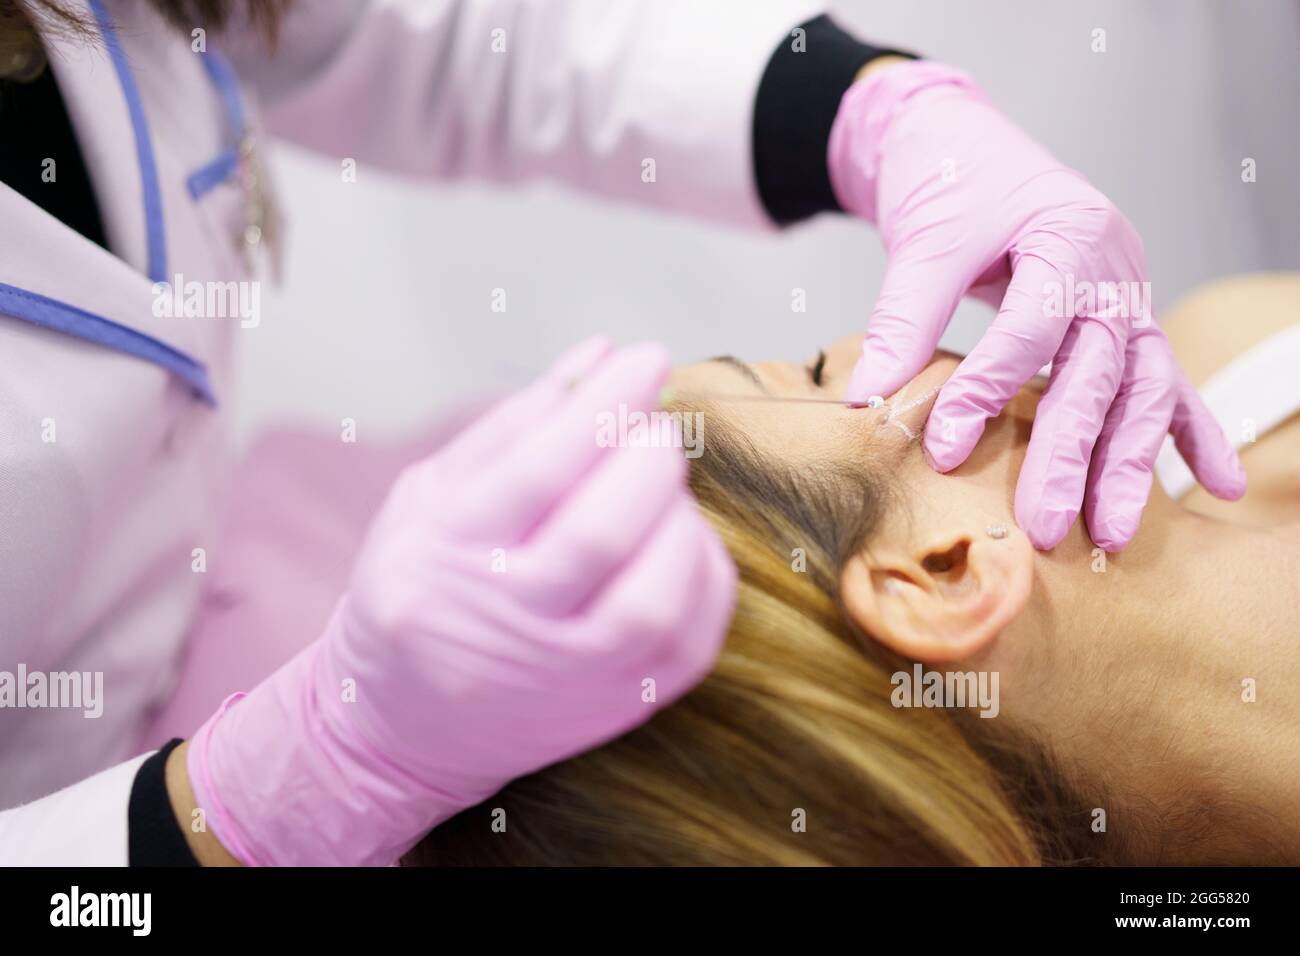 Doctor injecting PDO suture treatment threads into the face of a woman. Stock Photo